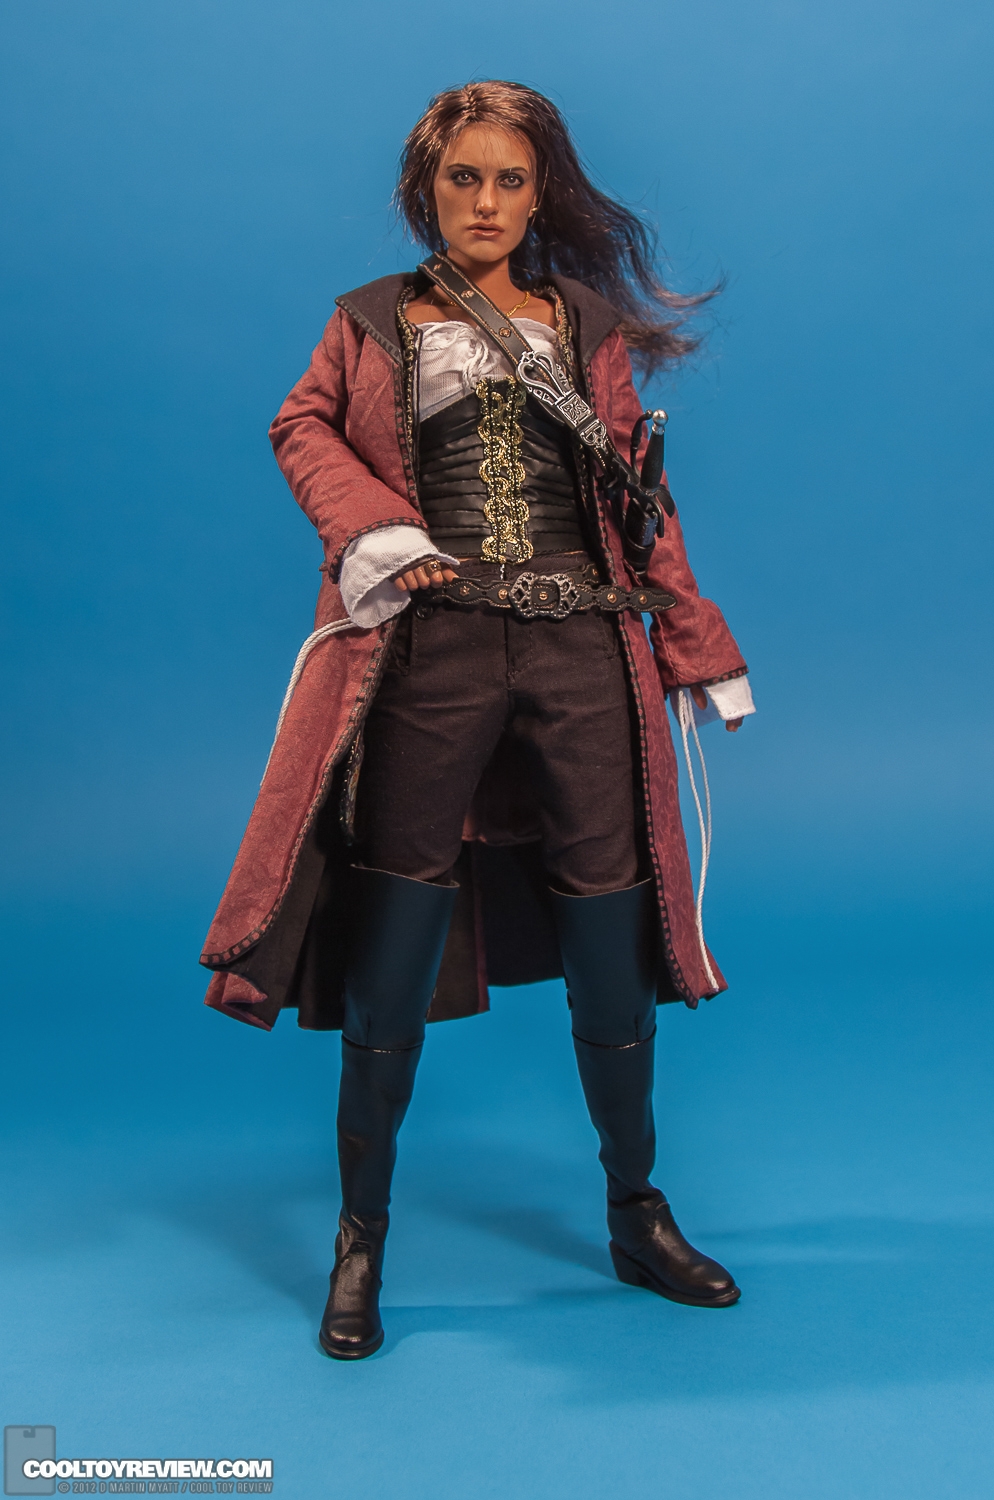 Angelica_Disney_Pirates_Of_The_Caribbean_Hot_Toys-33.jpg